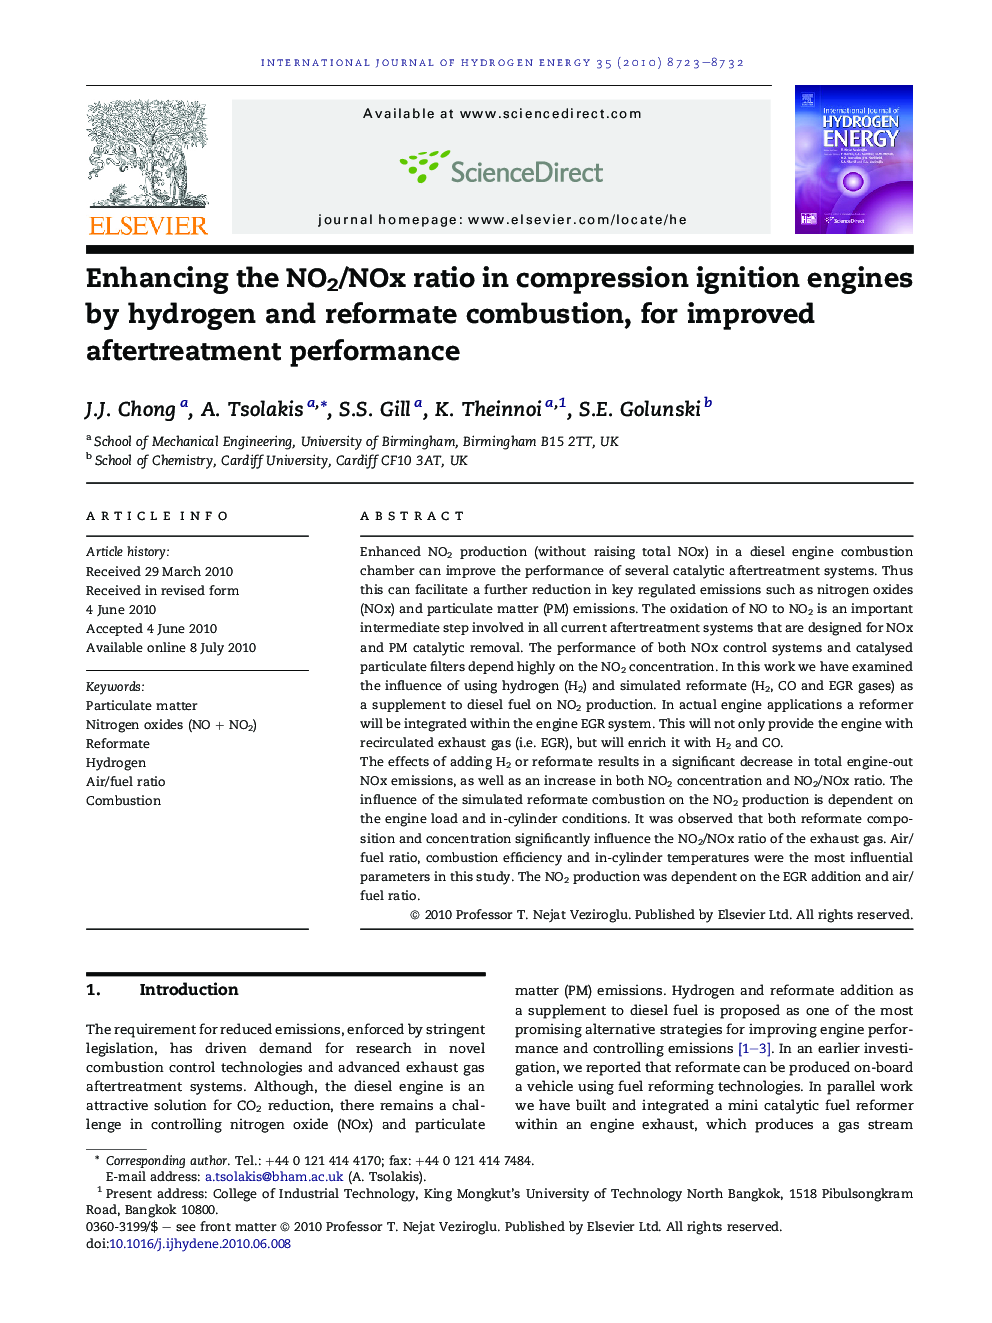 Enhancing the NO2/NOx ratio in compression ignition engines by hydrogen and reformate combustion, for improved aftertreatment performance